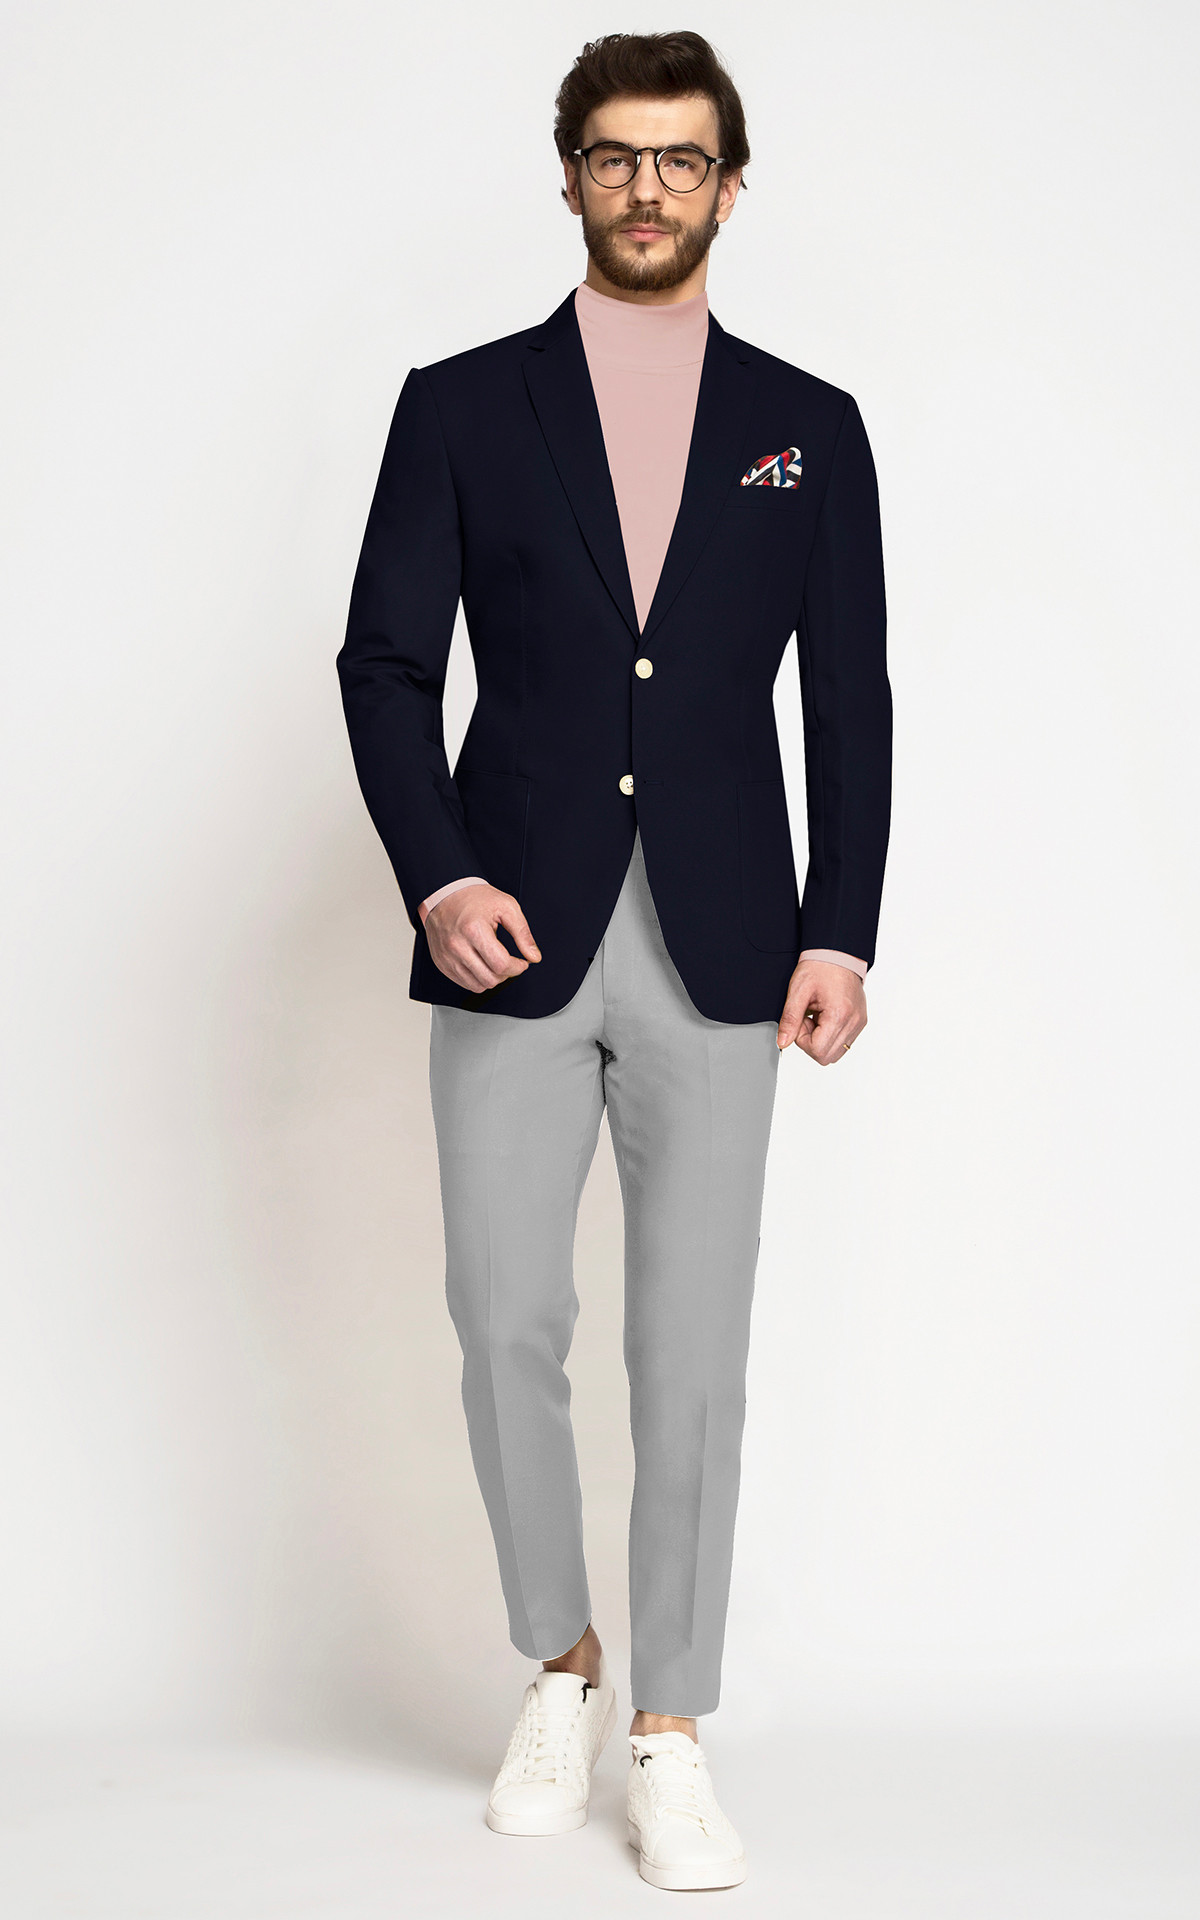 Broken suit: how to mix separates and color combinations | Mismatched  suits: jacket, blazer, pants and shirt pairing ideas